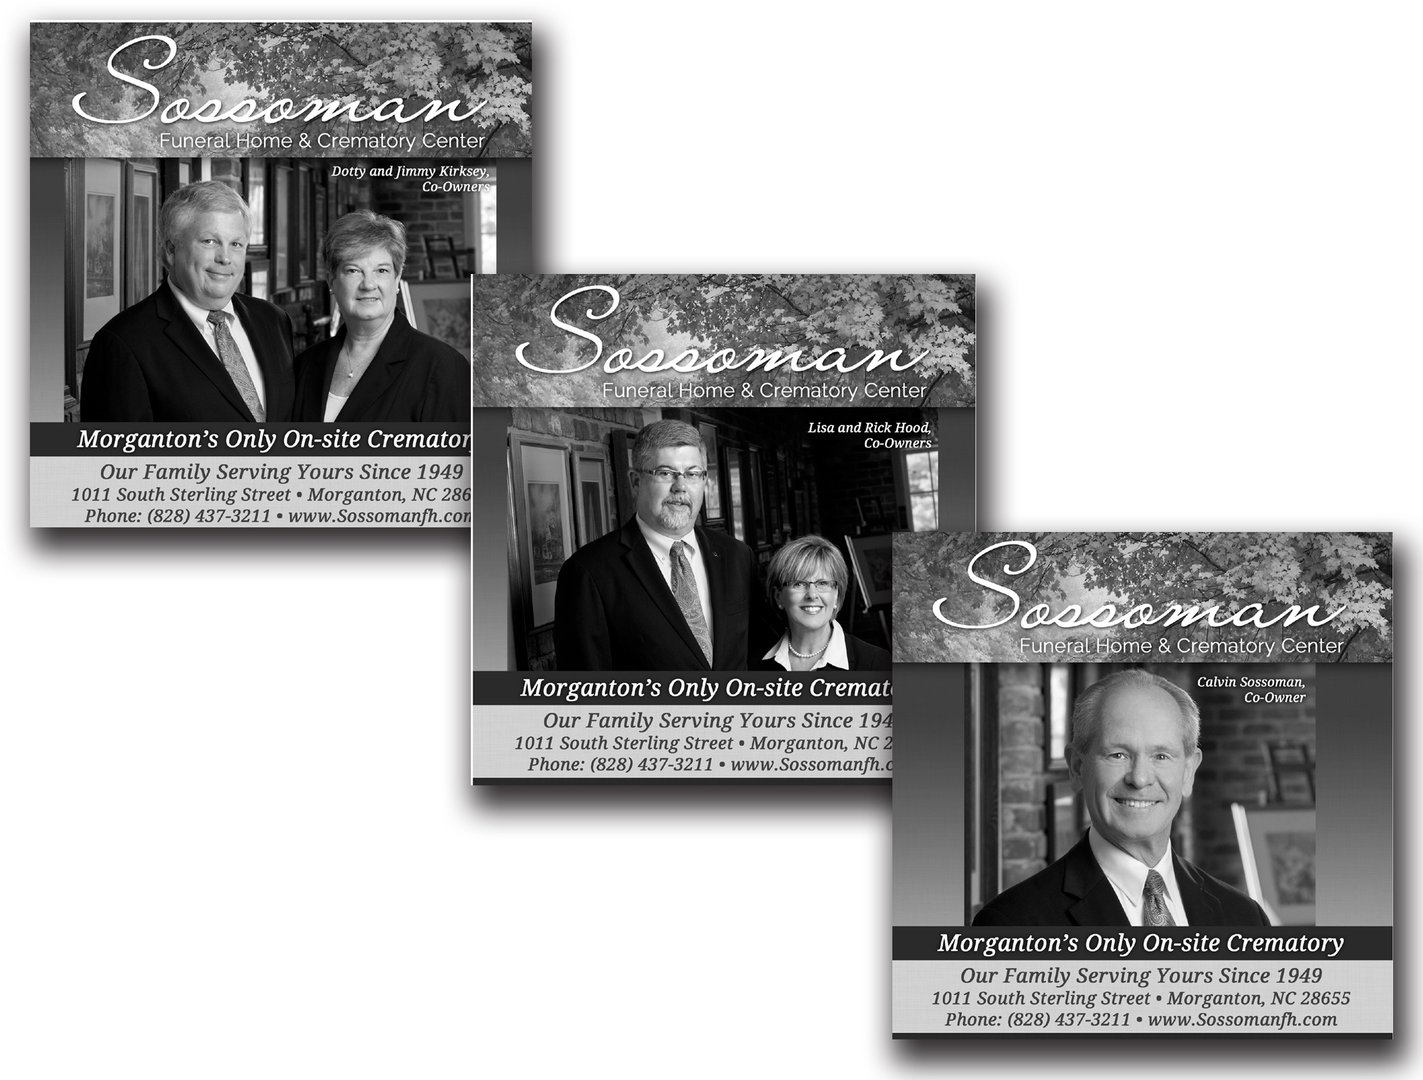 Sossoman Funeral Home and Crematory Center Newspaper Ads